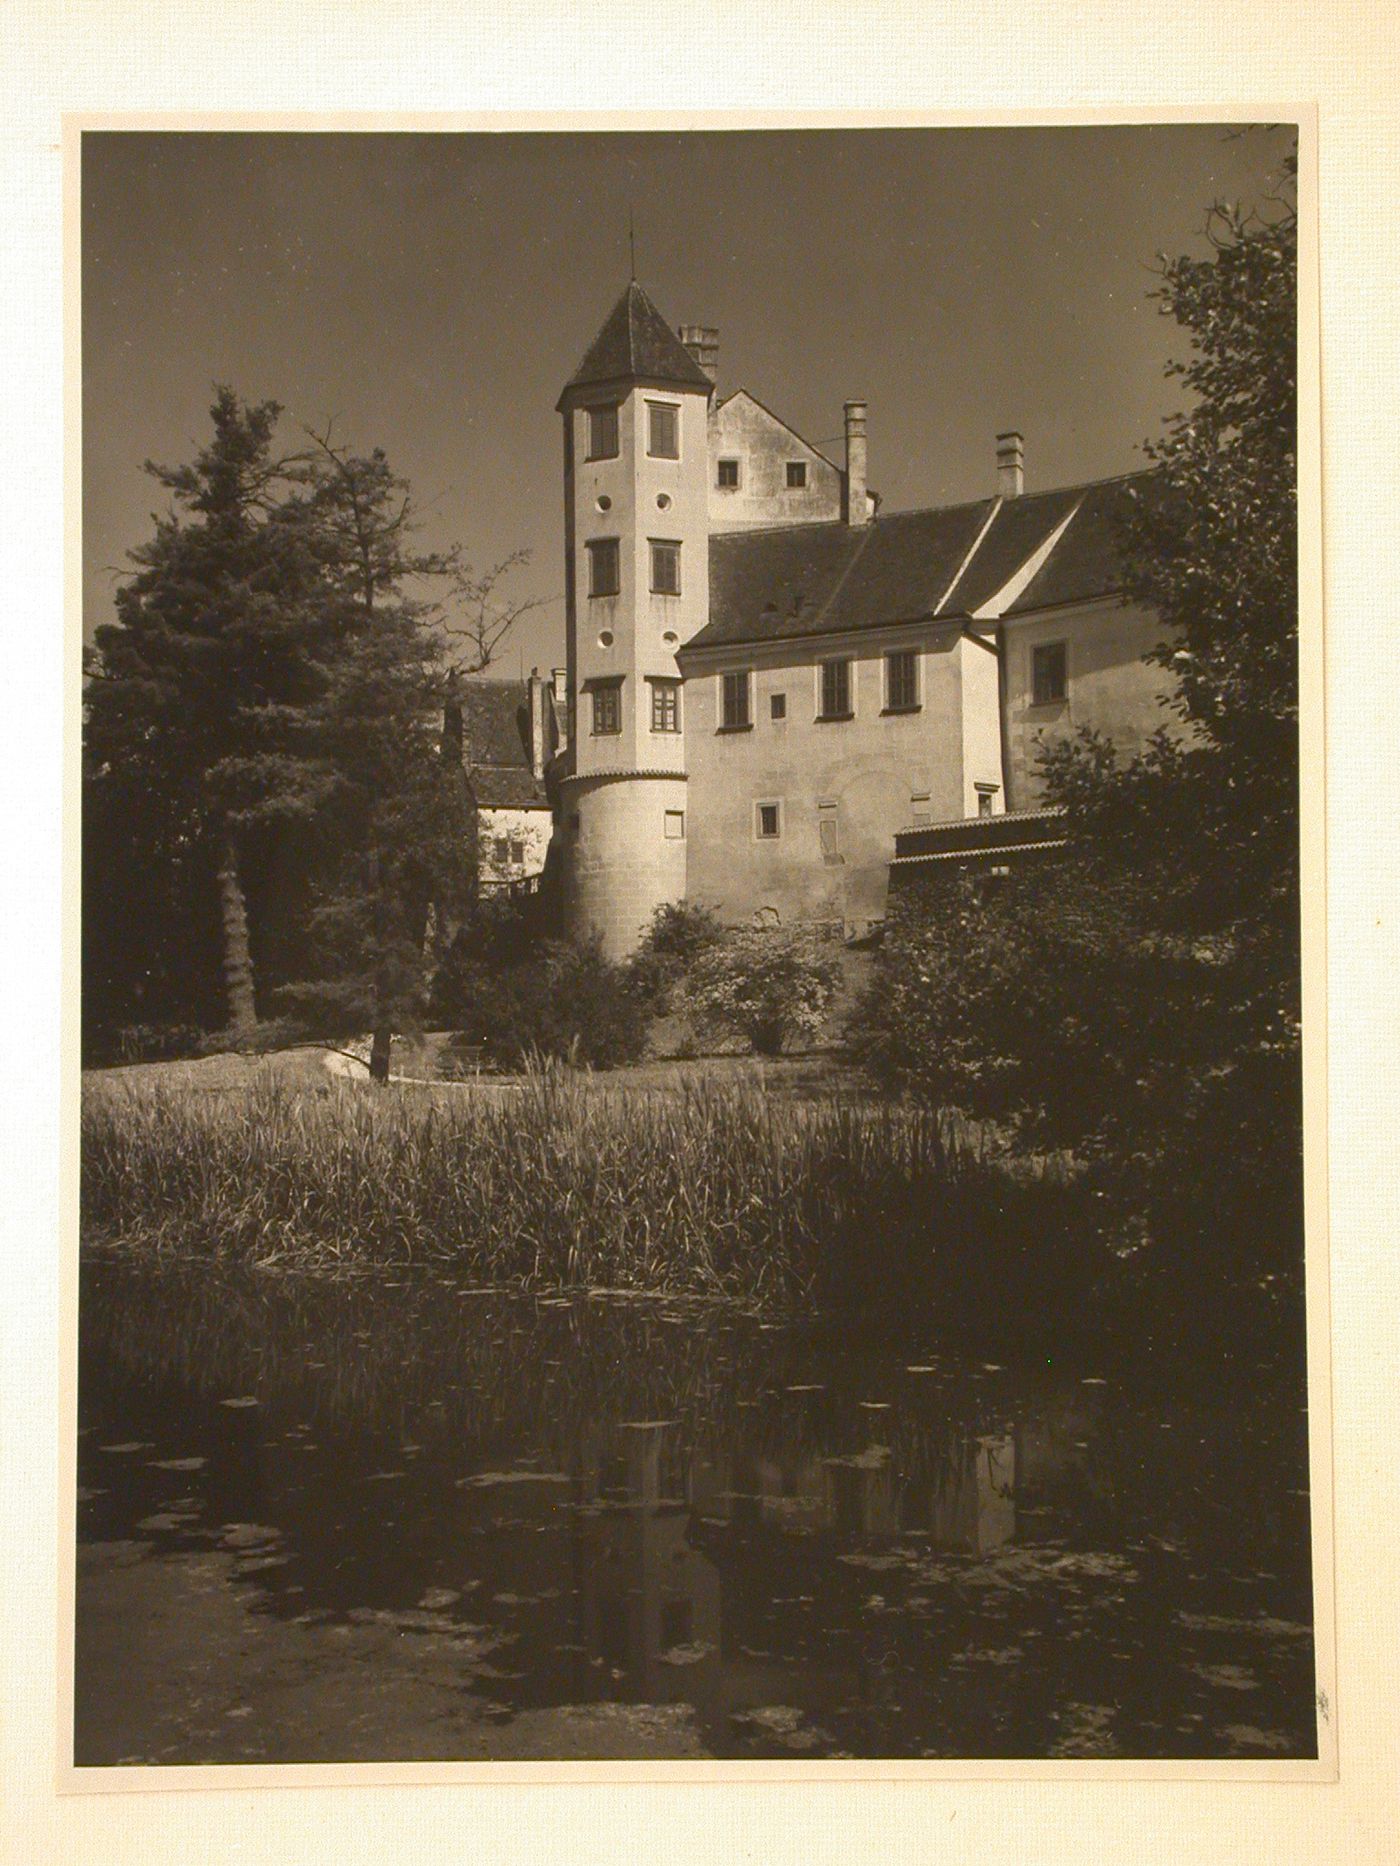 Rear view of buildings and a tower from across a pond, possibly showing a part of Telc Château, Telc, Czechoslovakia (now Czech Republic)